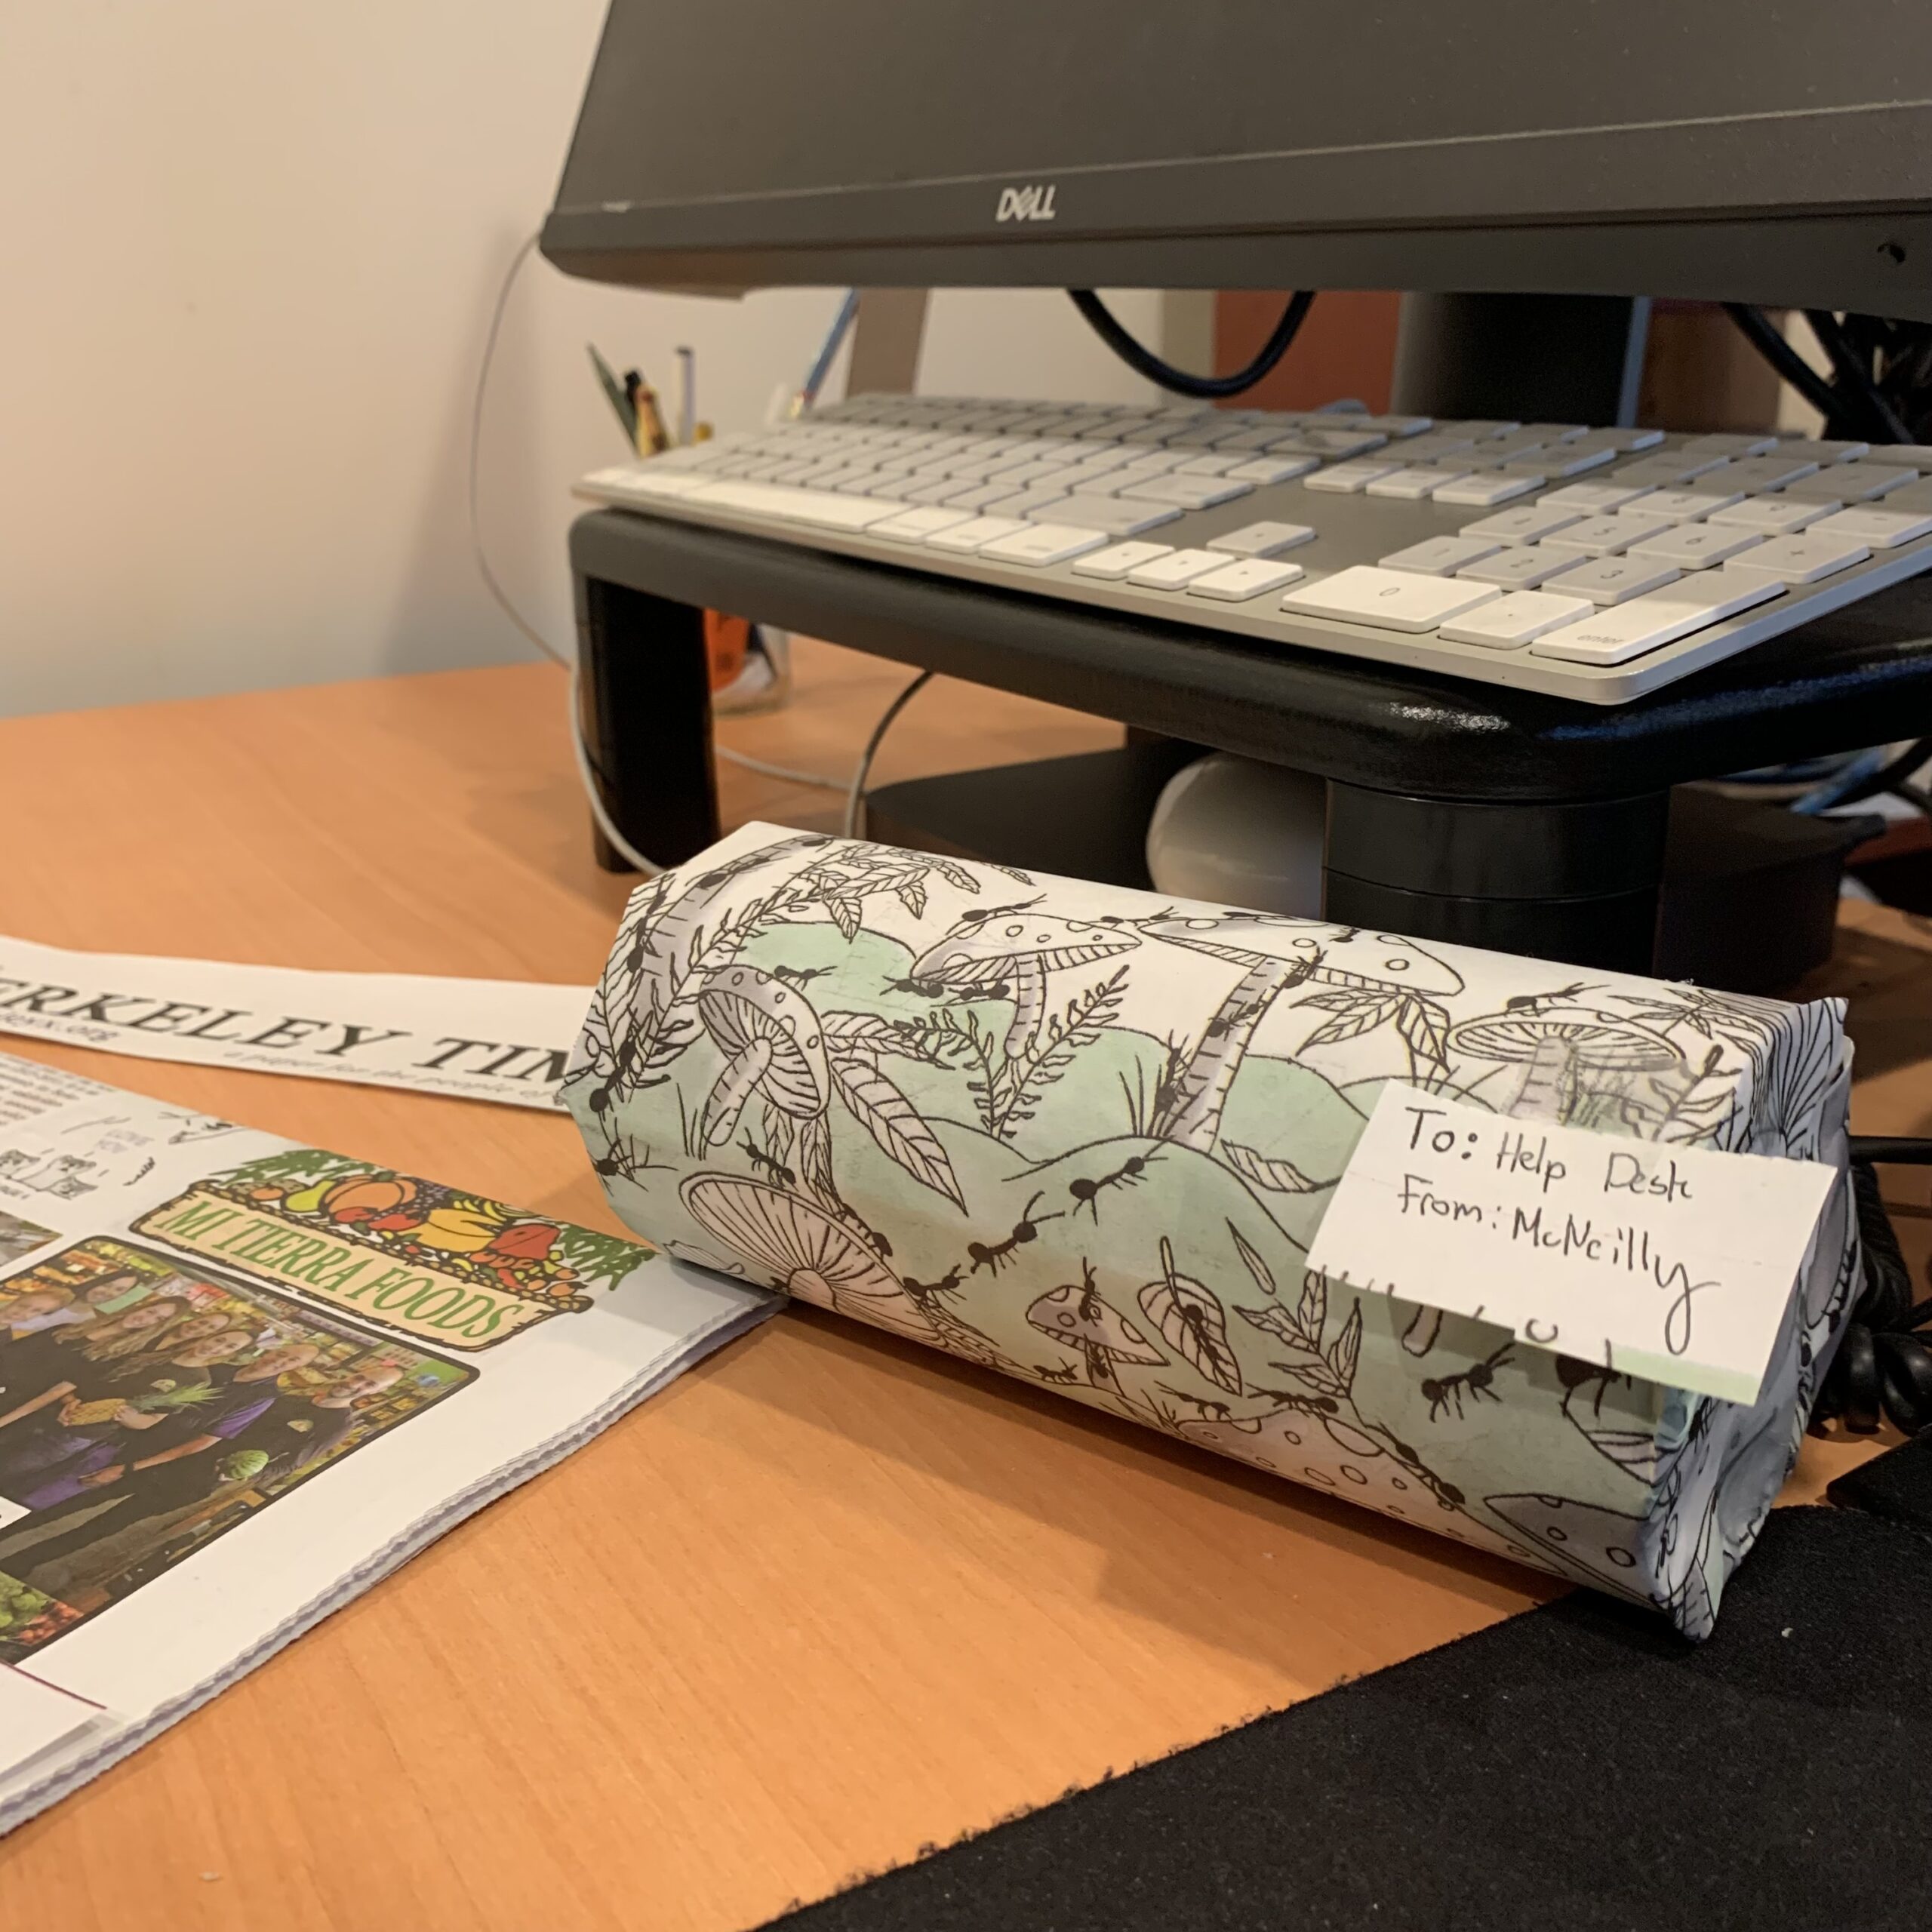 a cylindrical container wrapped in newspaper. It is labeled "to: Help Desk from: McNeilly"